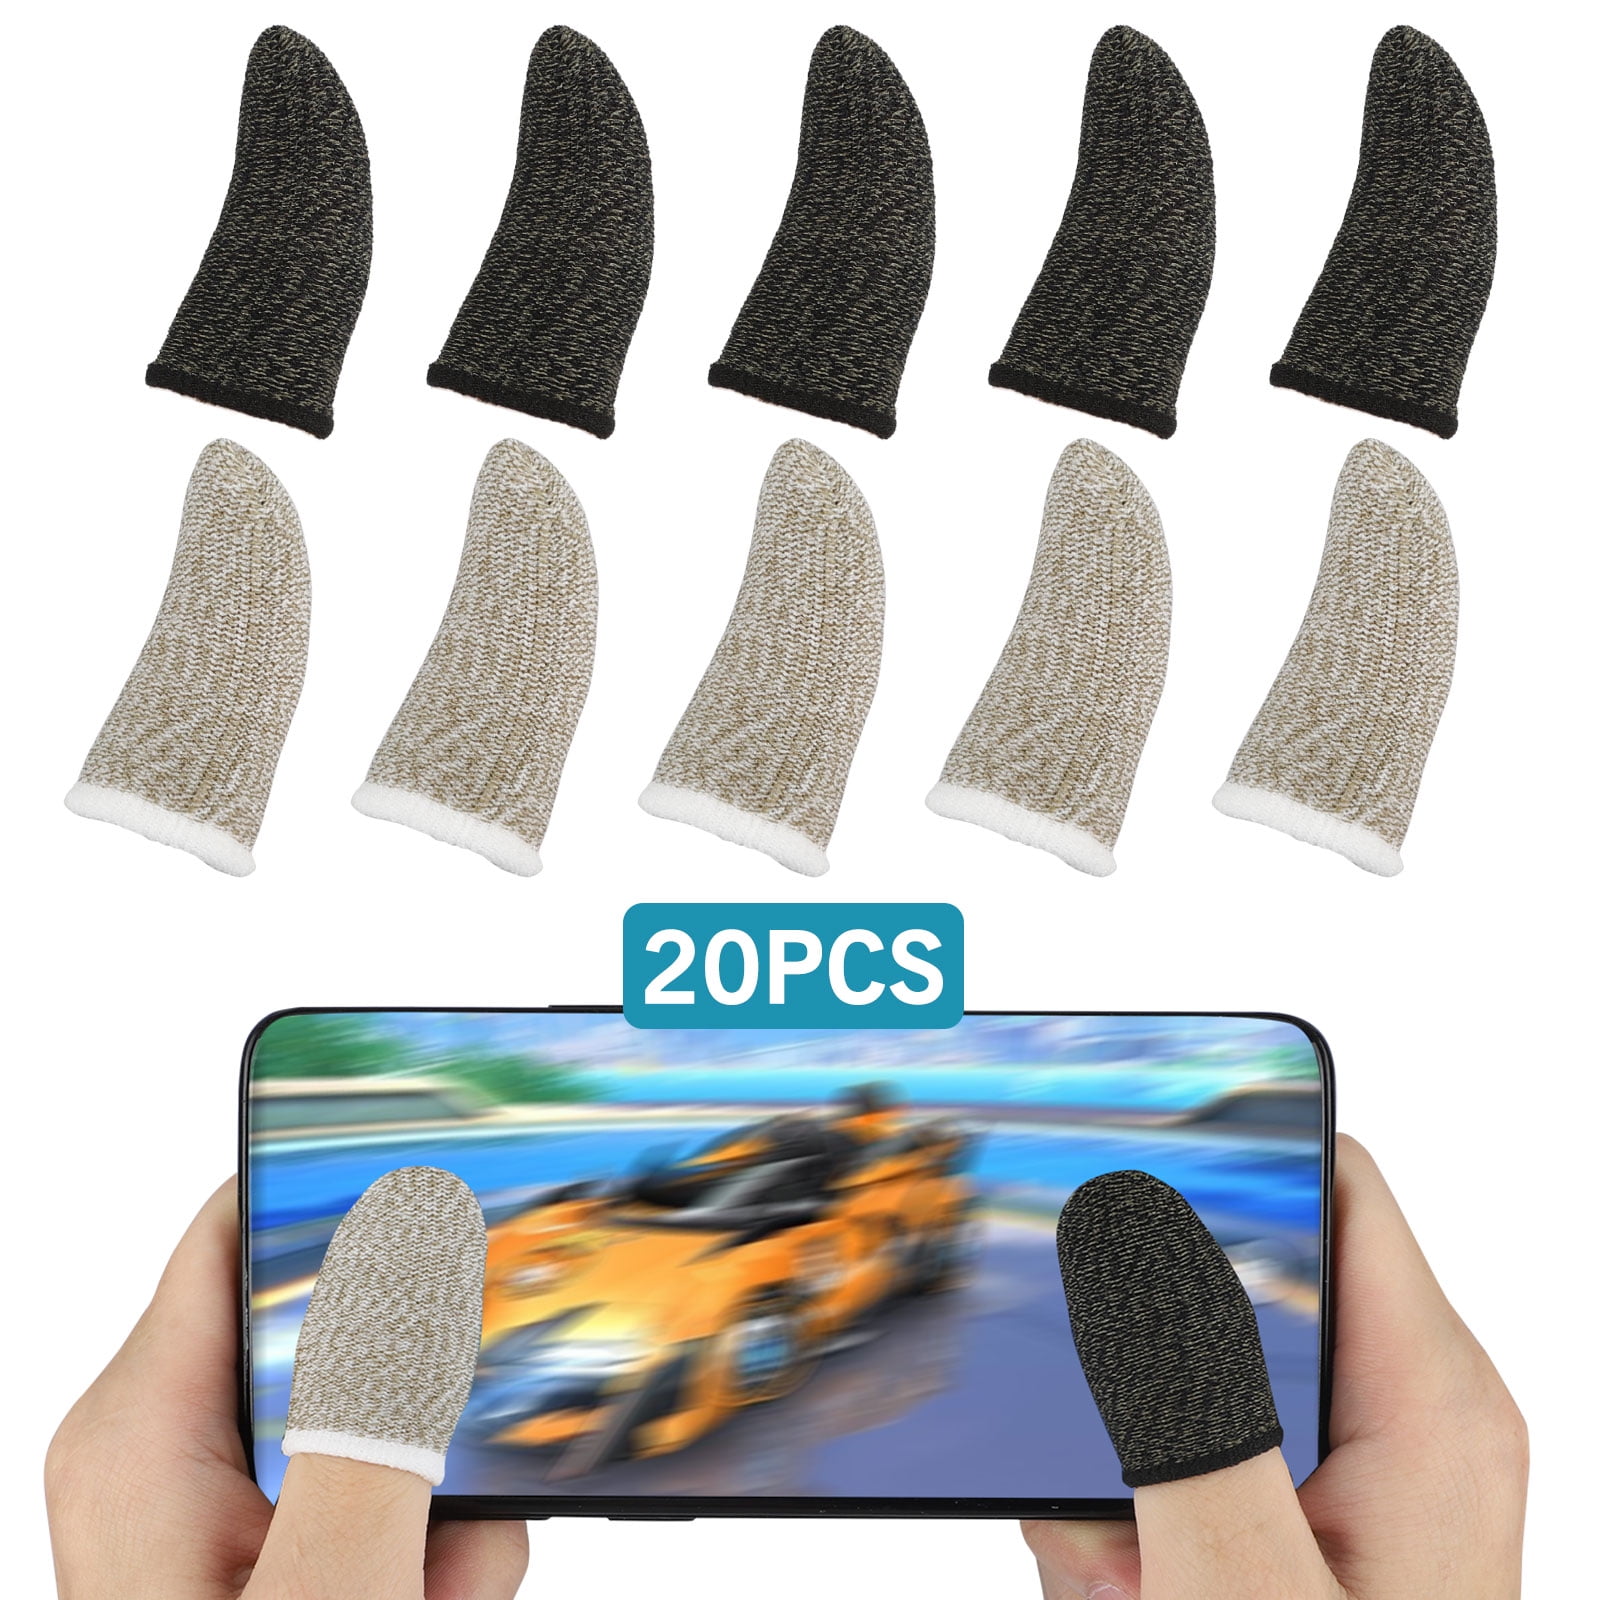 COGICOGI Finger Sleeves for Gaming Ultra-Thin,Soft,Sensitive Shoot Aim,Anti-Sweat Breathable Touchscreen,Thumb Sleeves Mobile Gaming for Pubg Fortnine【16PCS】 